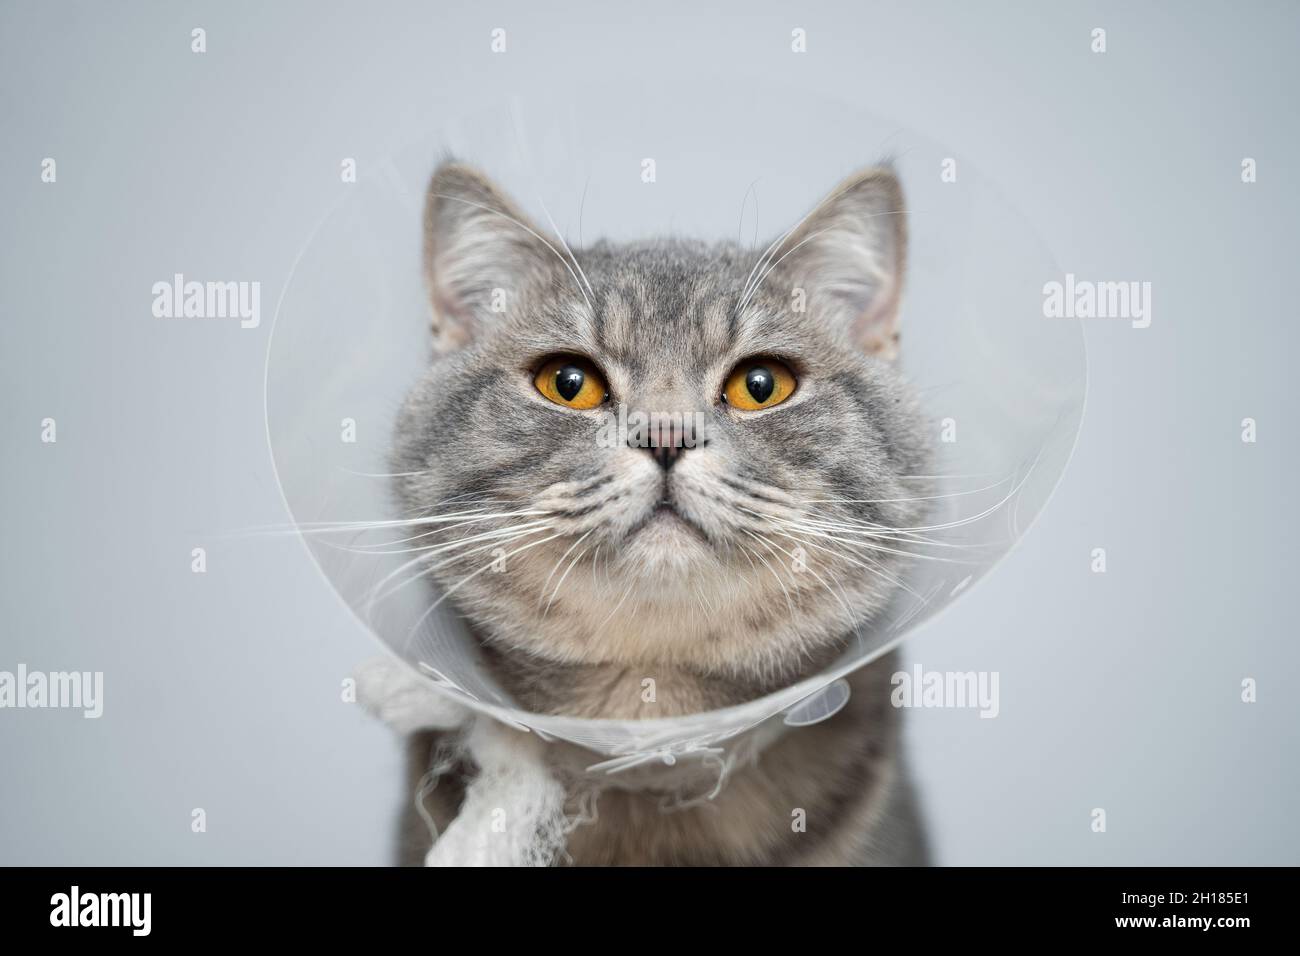 The cat wears a collar to prevent licking the wound after sterilization.  Neutering the male cat. Sick cat concept. 6973741 Stock Photo at Vecteezy